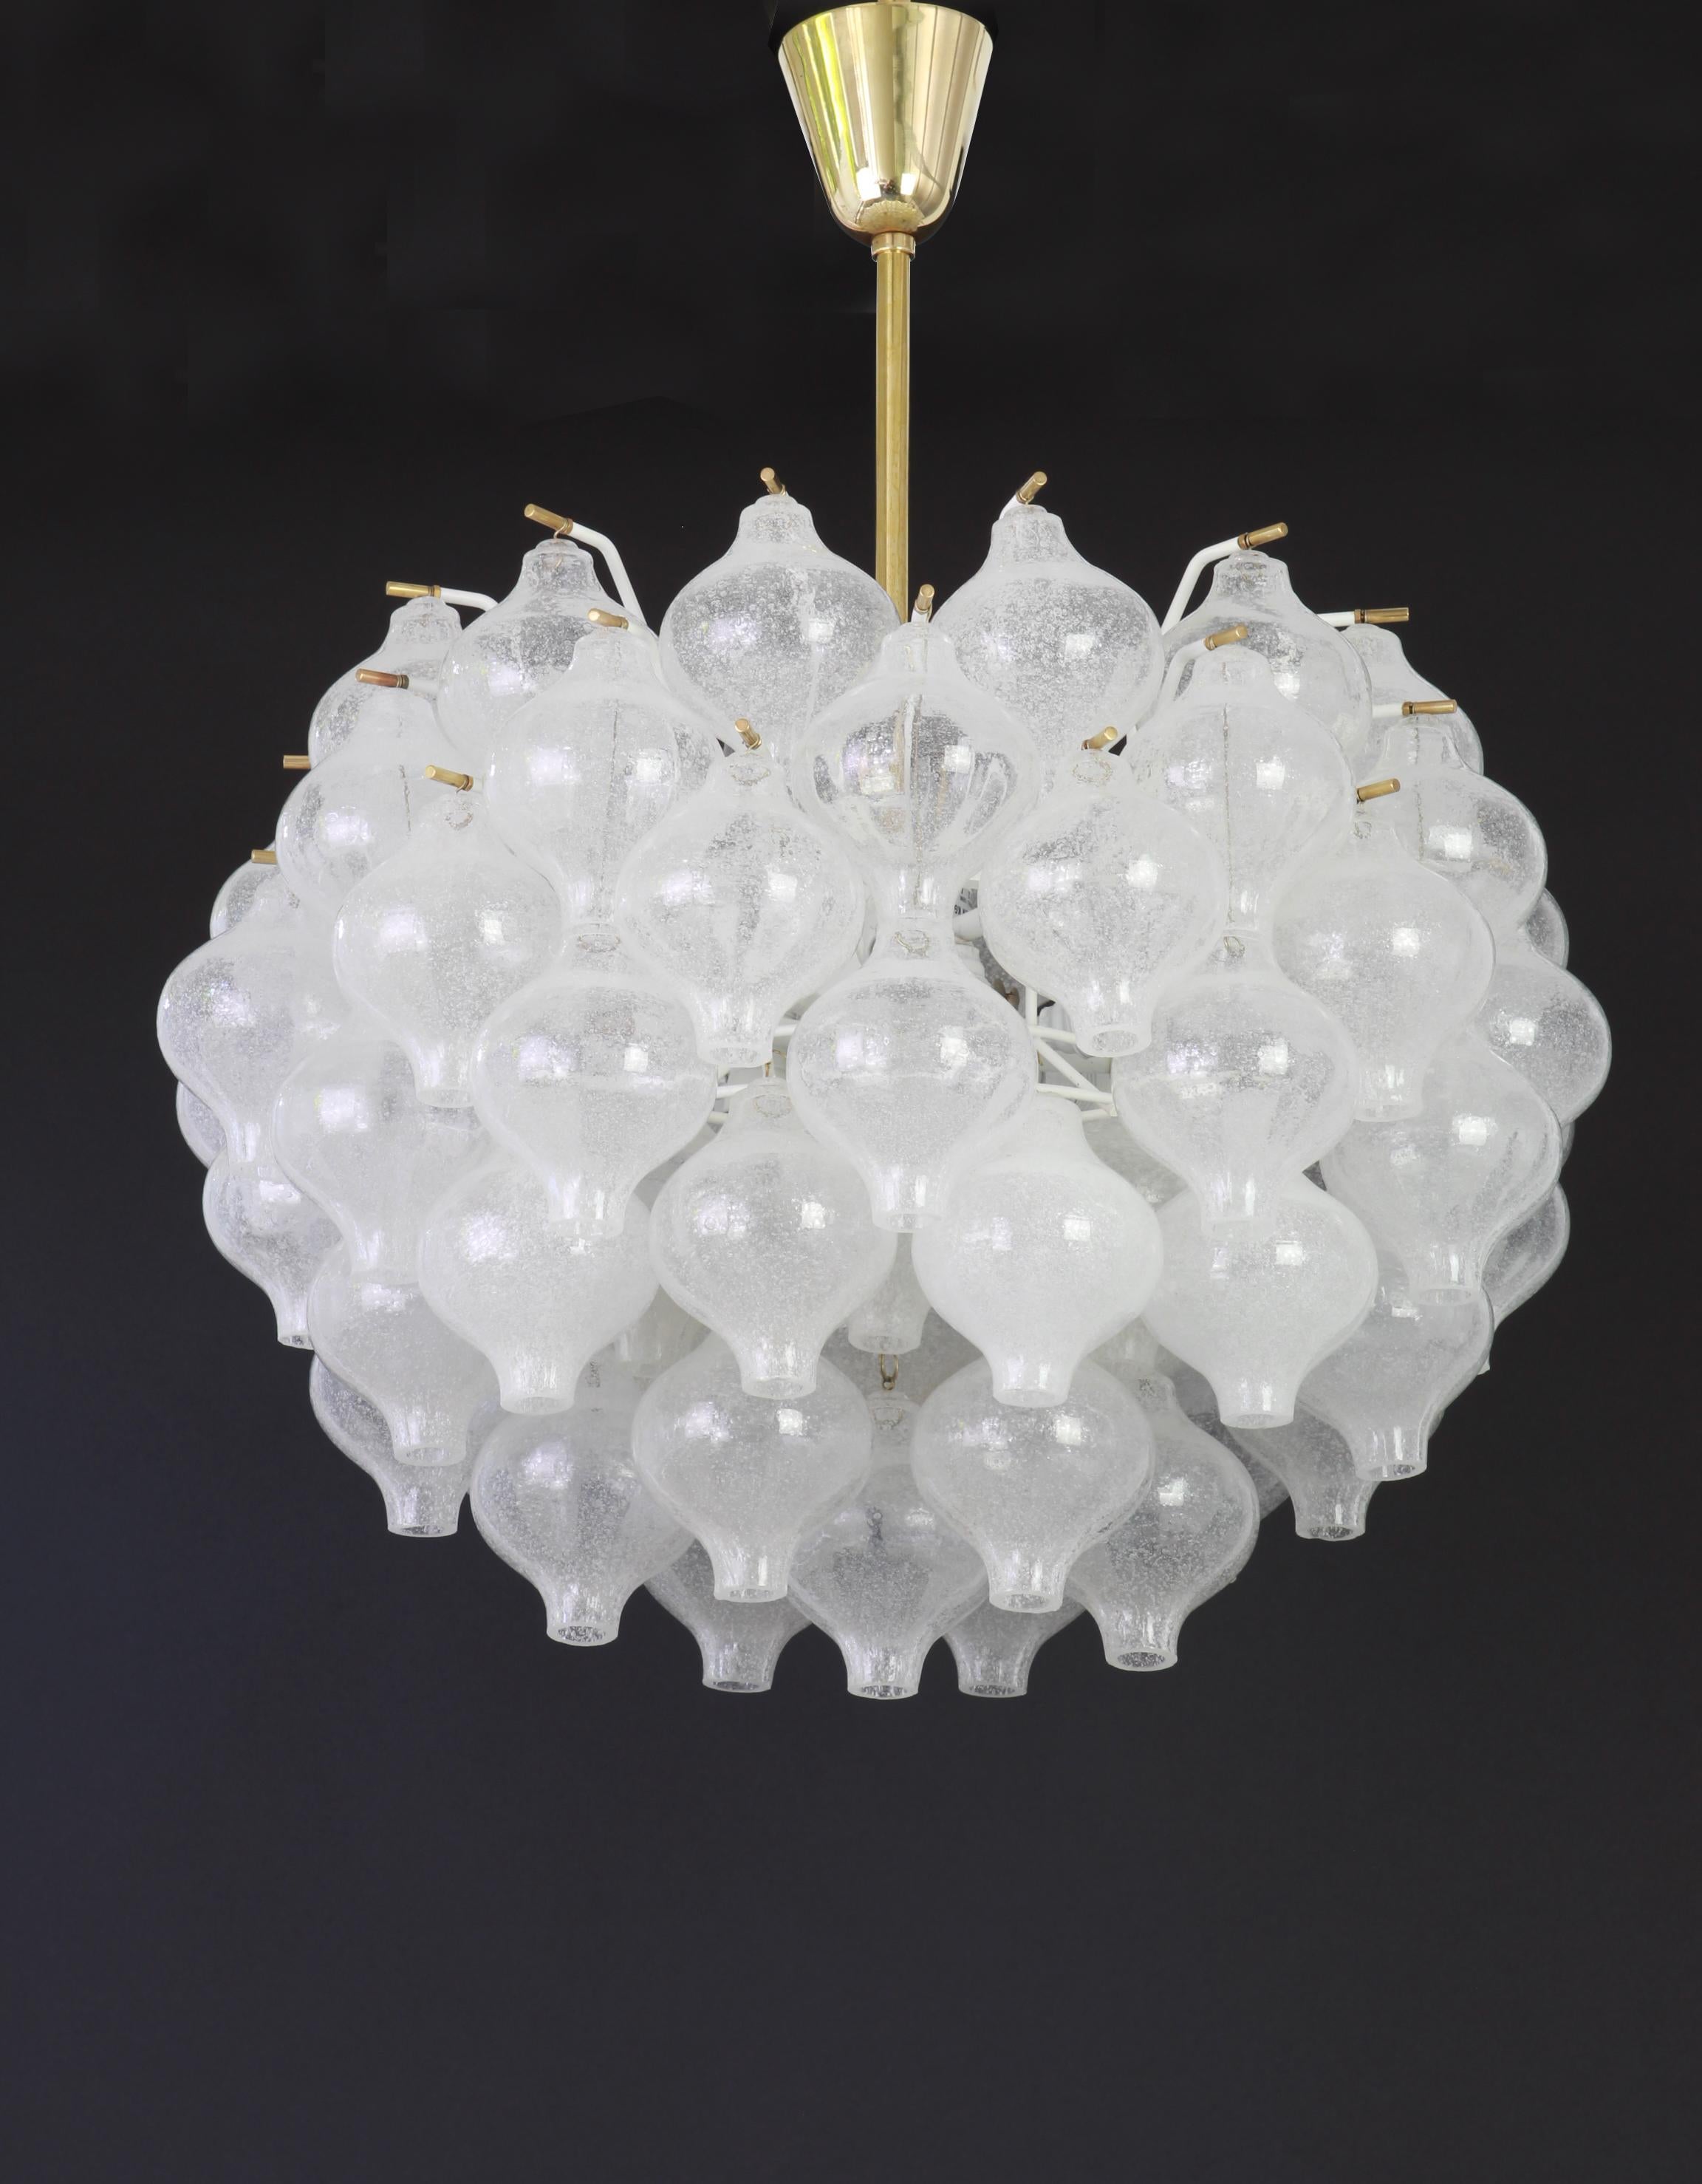 Wonderful onion shaped -Tulipan glass chandelier. 73 hand blown glasses suspended on white painted metal frame and brass center rod.
Best of design from the 1960s by Kalmar, Austria. High quality of the materials.

Sockets: 12 x E14/ or E12